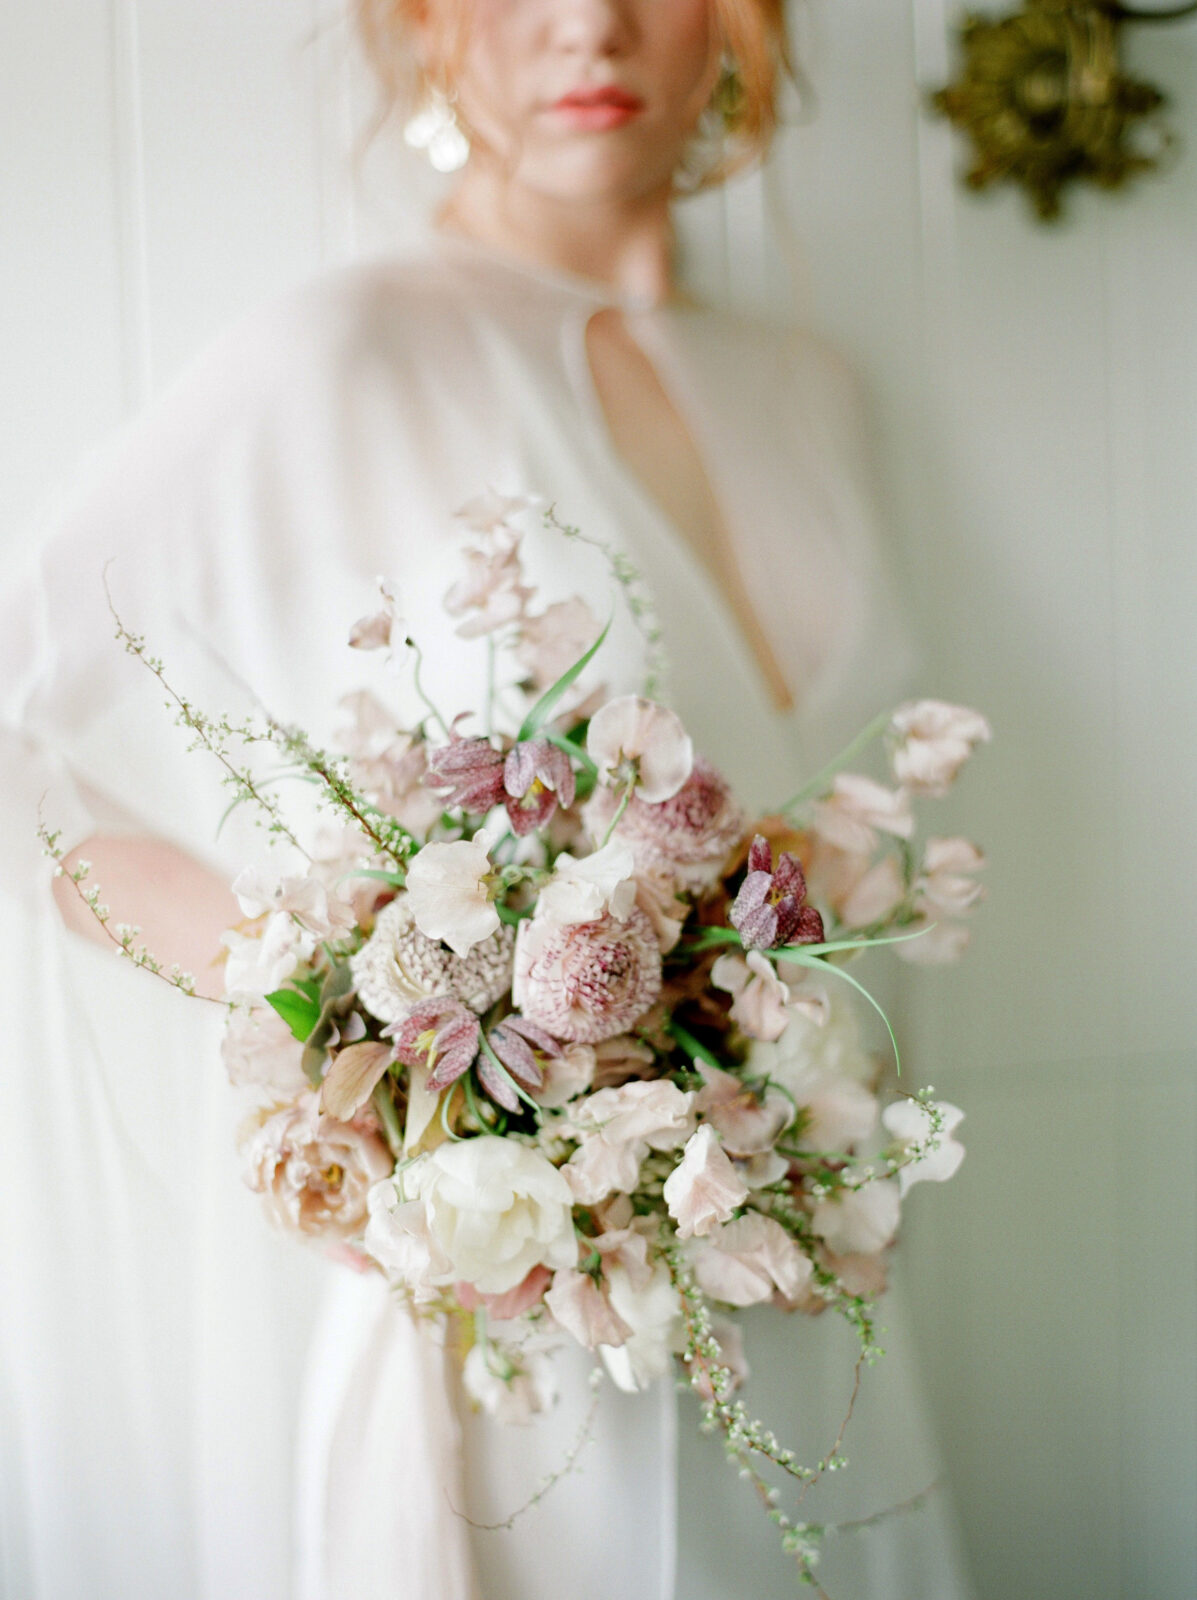 Bridal Bouquet Inspiration for Spring: 12 of the Prettiest Bouquets We've Seen This Spring in Alberta and the Rockies